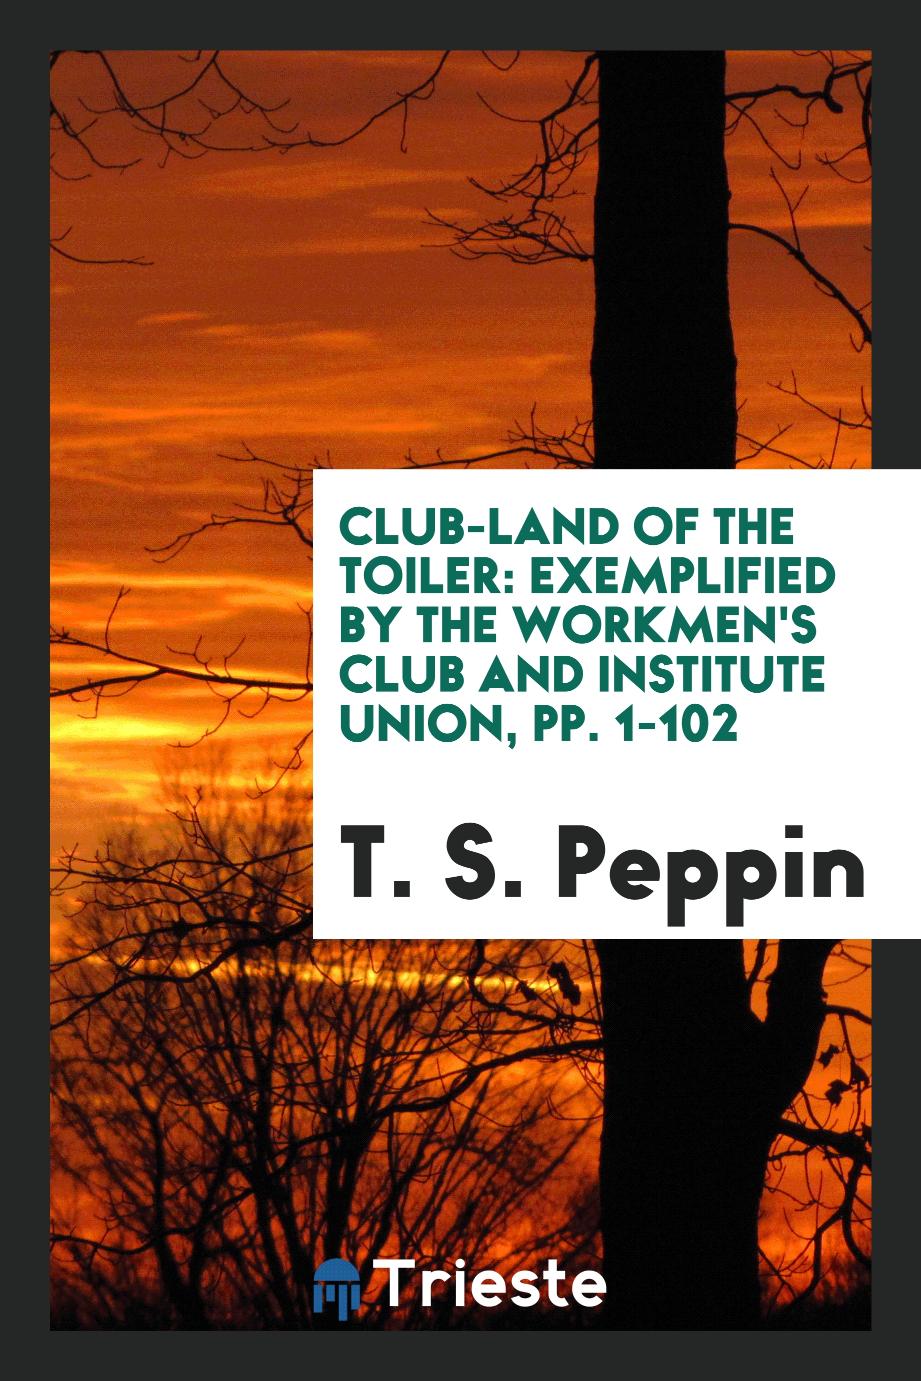 Club-Land of the Toiler: Exemplified by the Workmen's Club and Institute Union, pp. 1-102